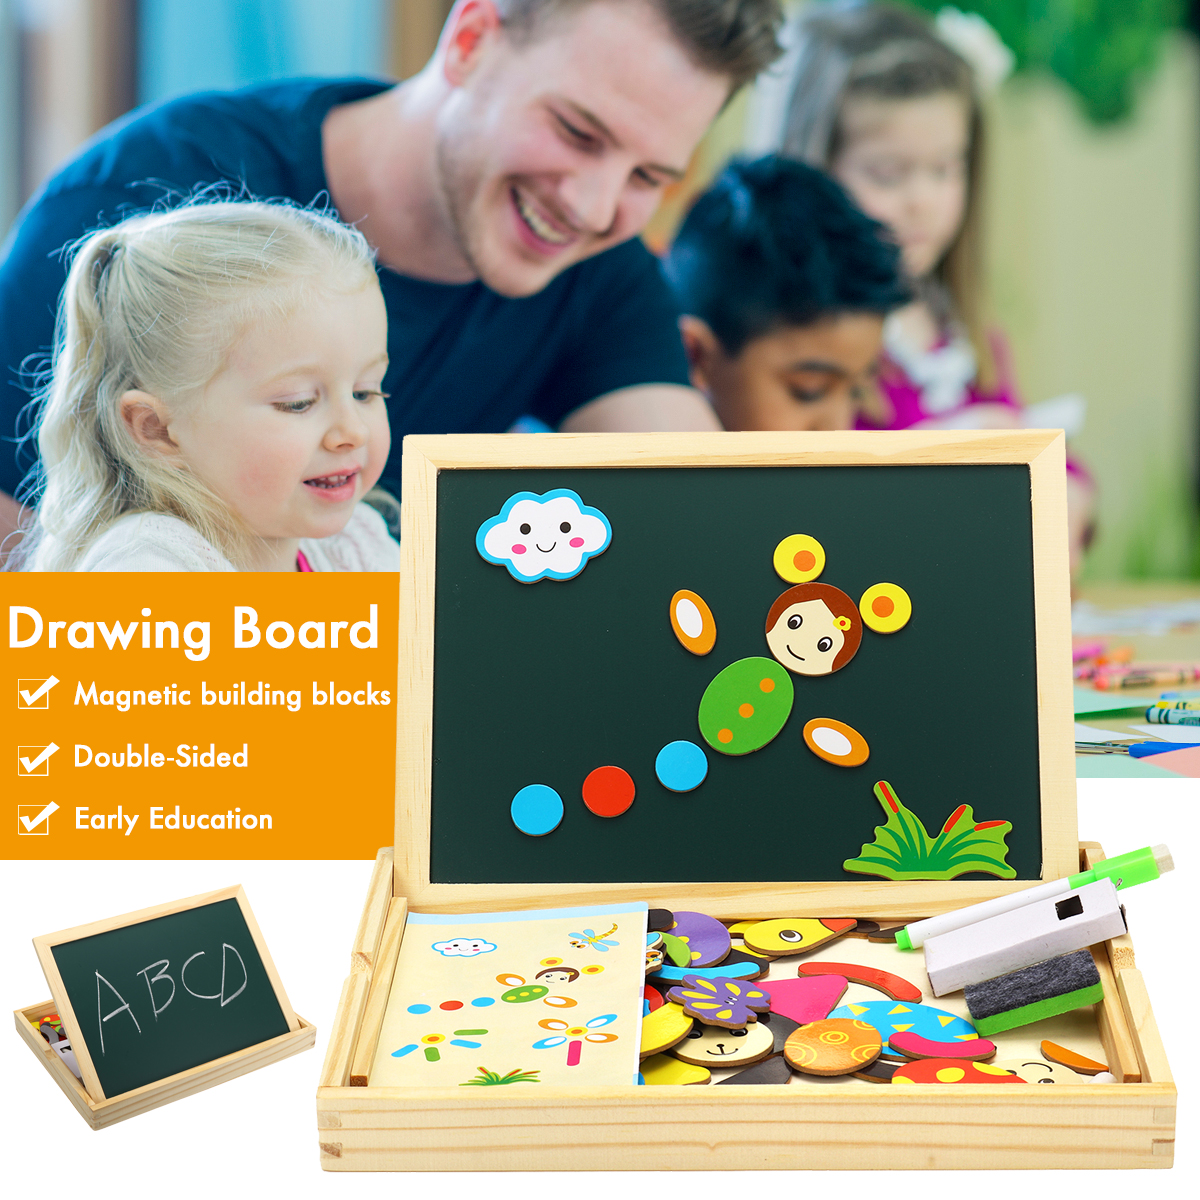 Wooden-Magnetic-Double-Sided-Drawing-Board-Blocks-Children-Early-Education-Toys-1676963-1